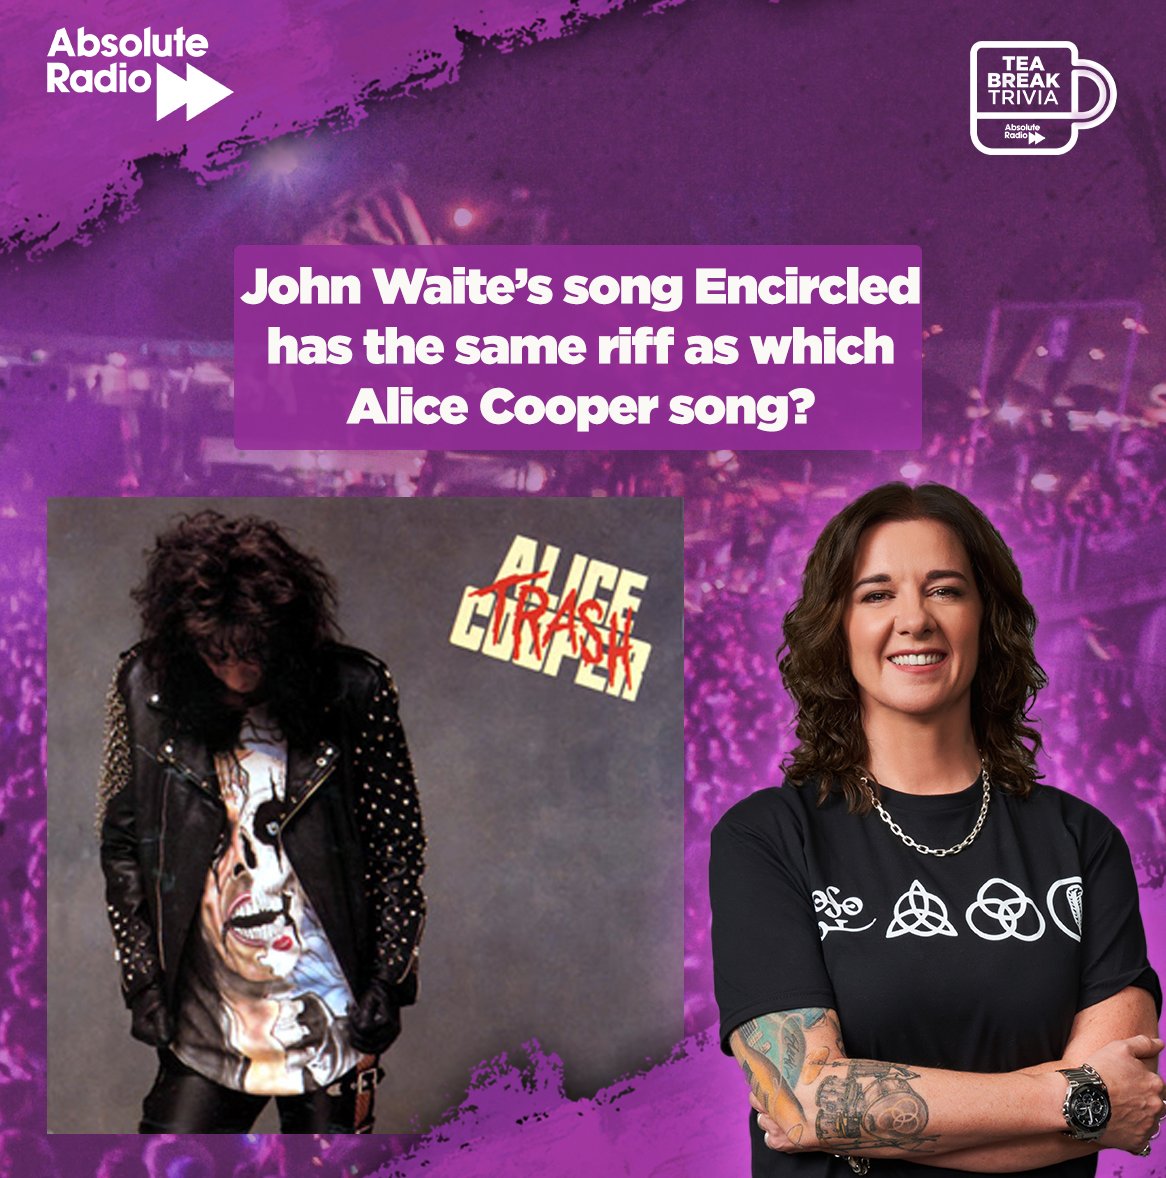 For #TeaBreakTrivia this morning, @leonagraham wants you to answer the following... John Waite’s song Encircled has the same riff as which Alice Cooper song?